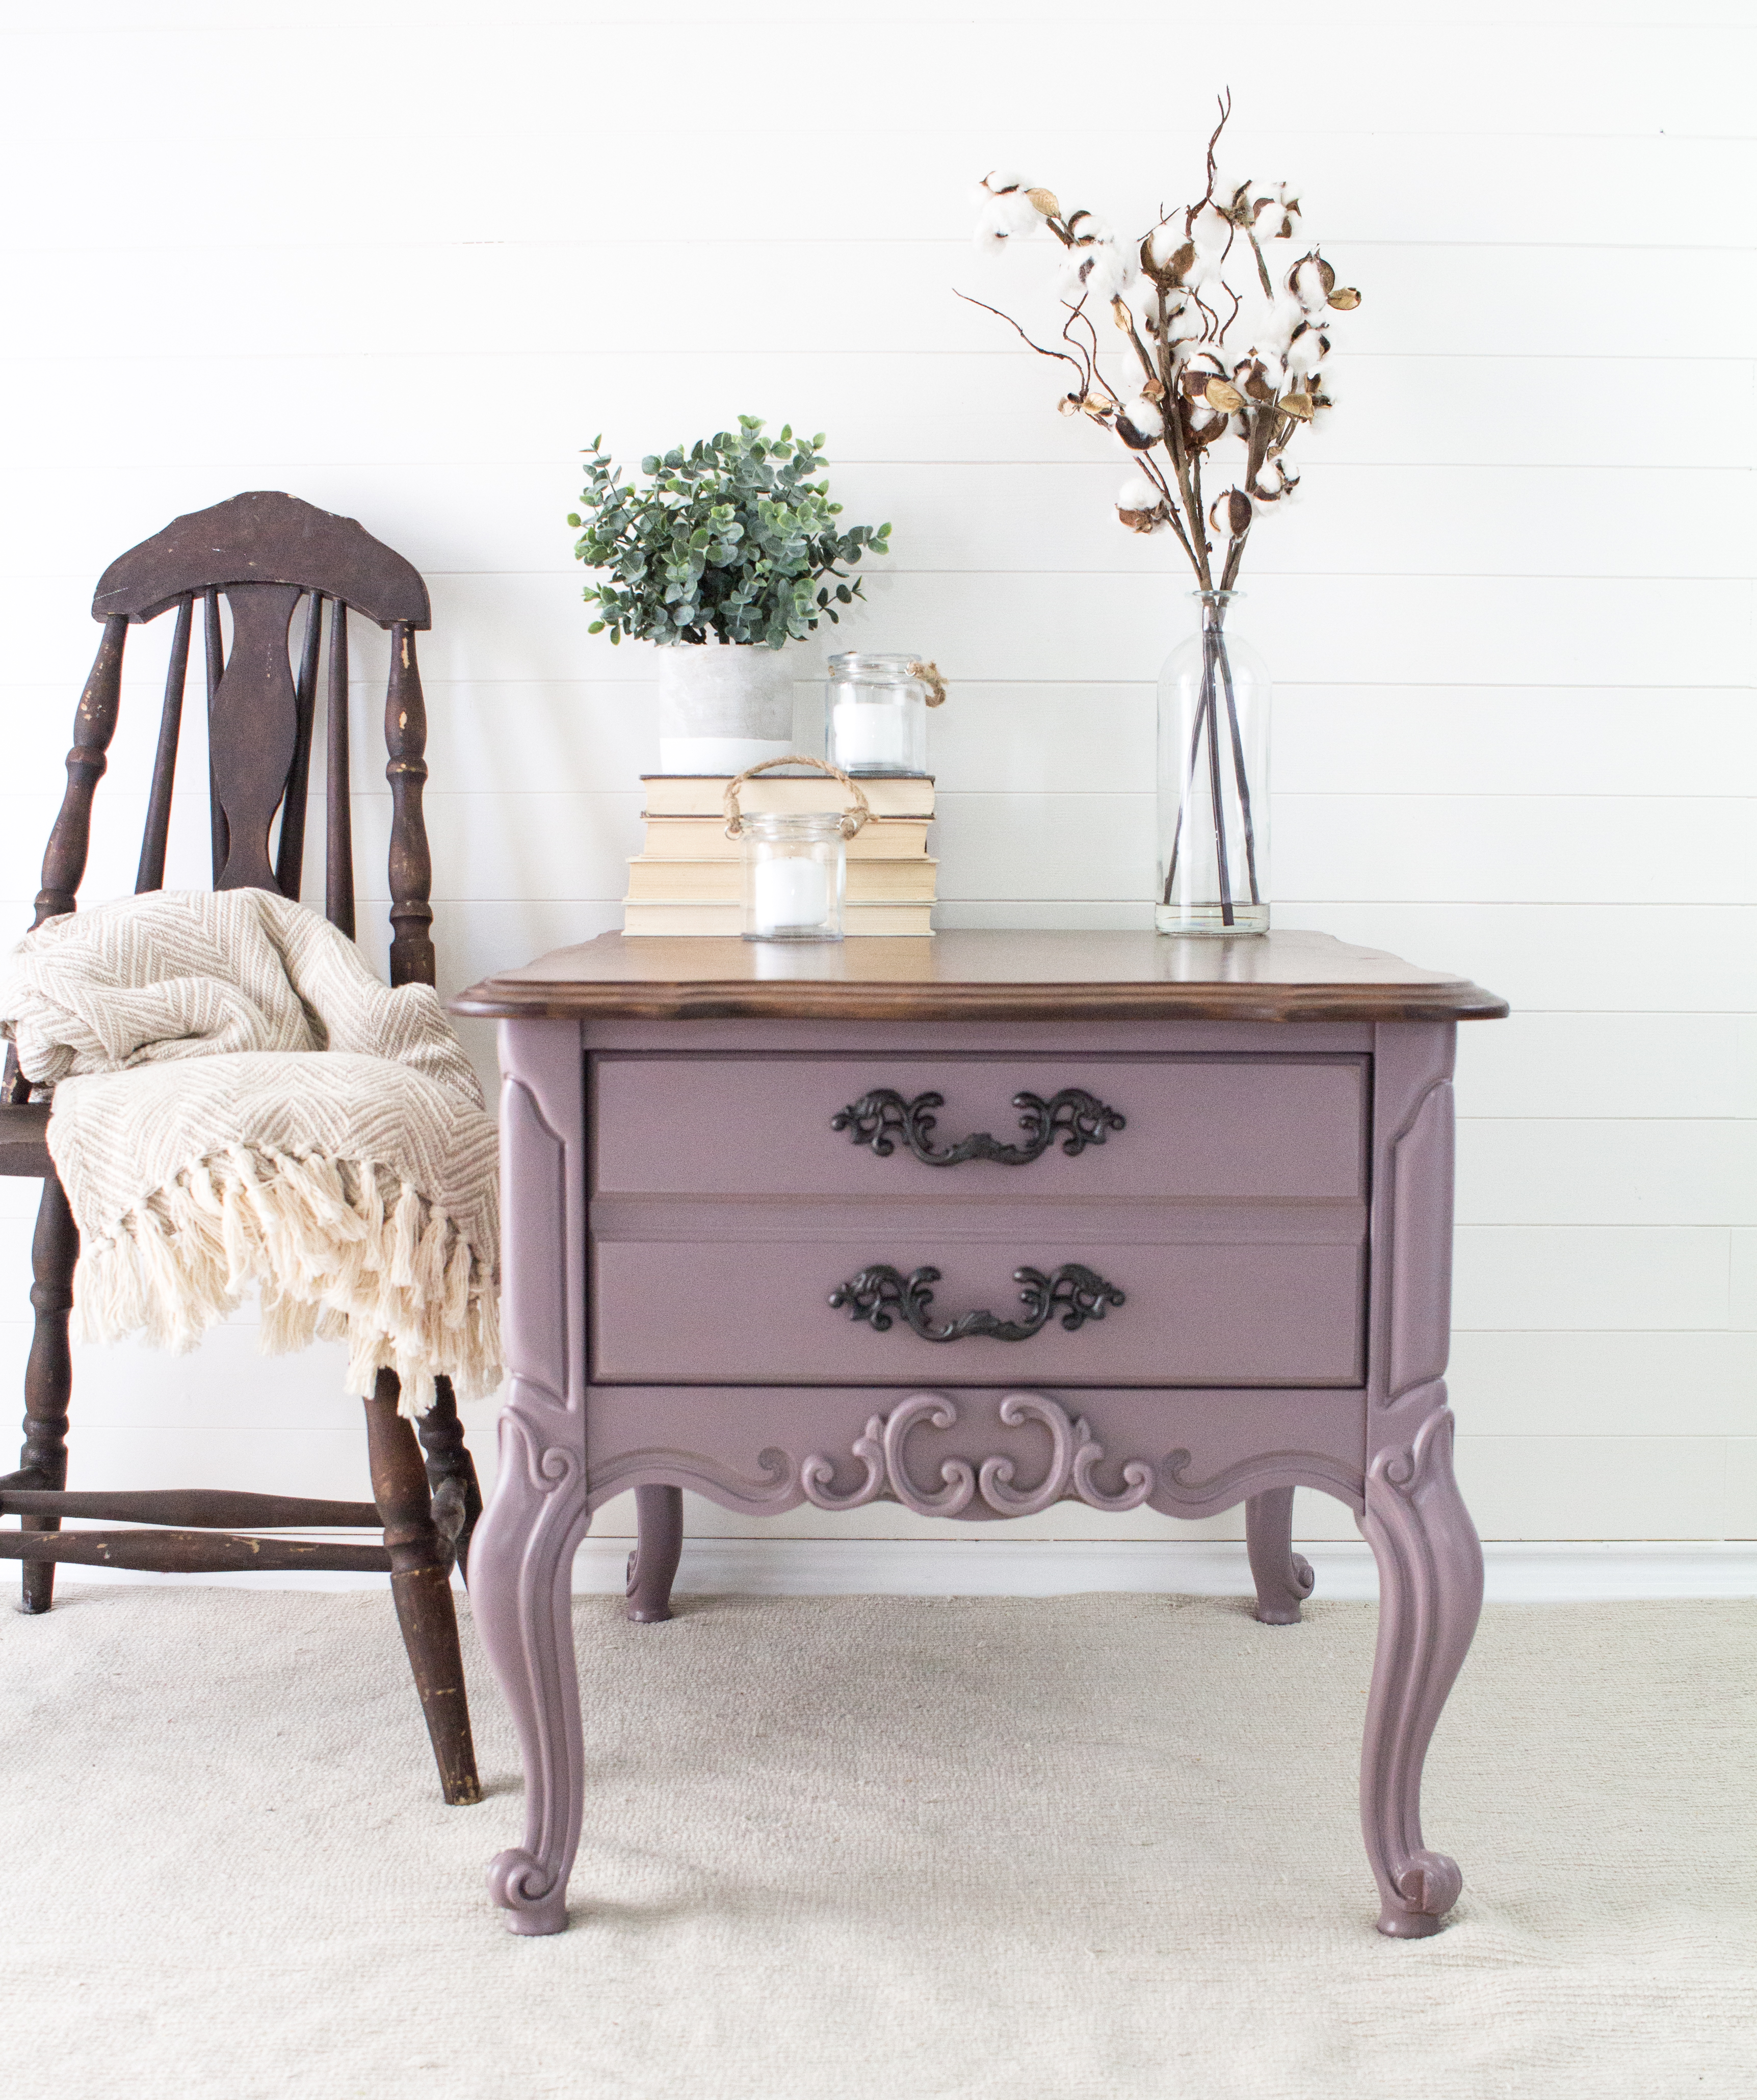 French Provincial & Lavender